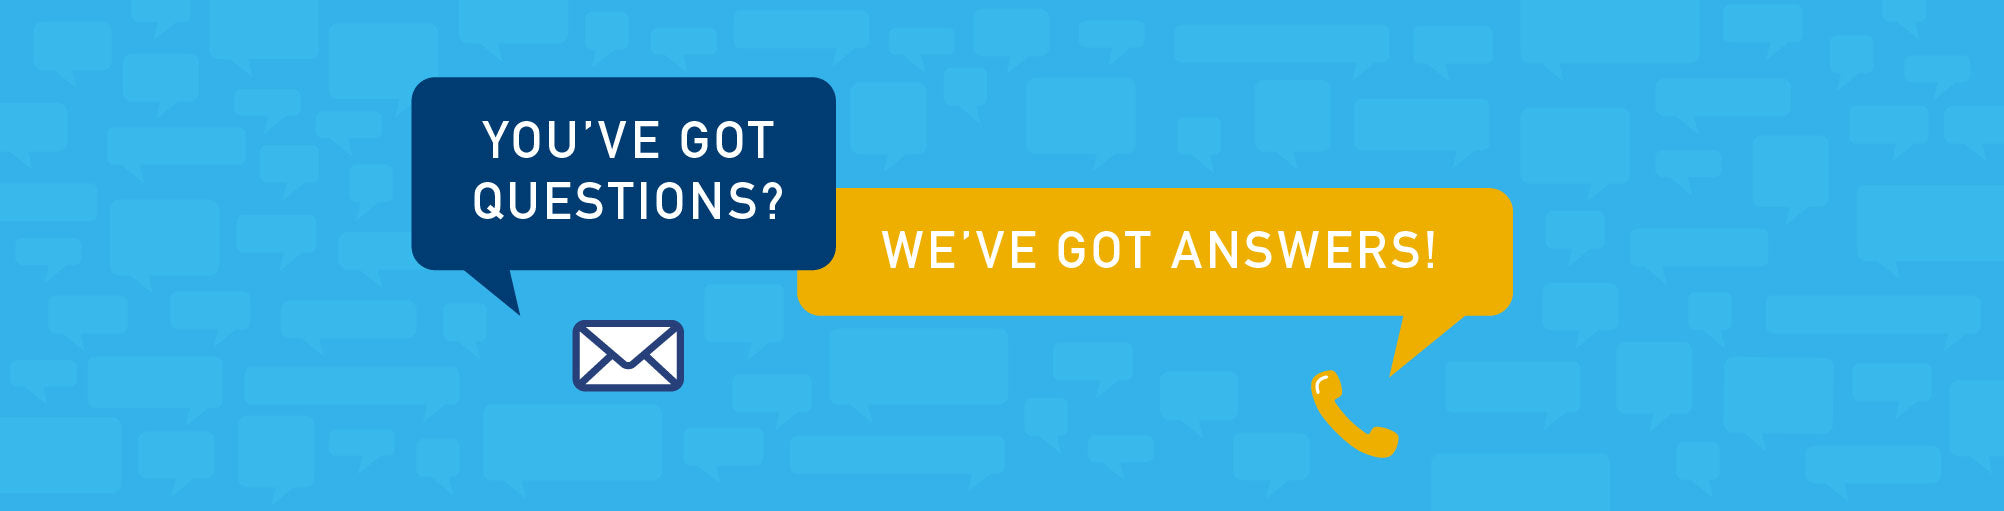 You've got questions? We've got answers!